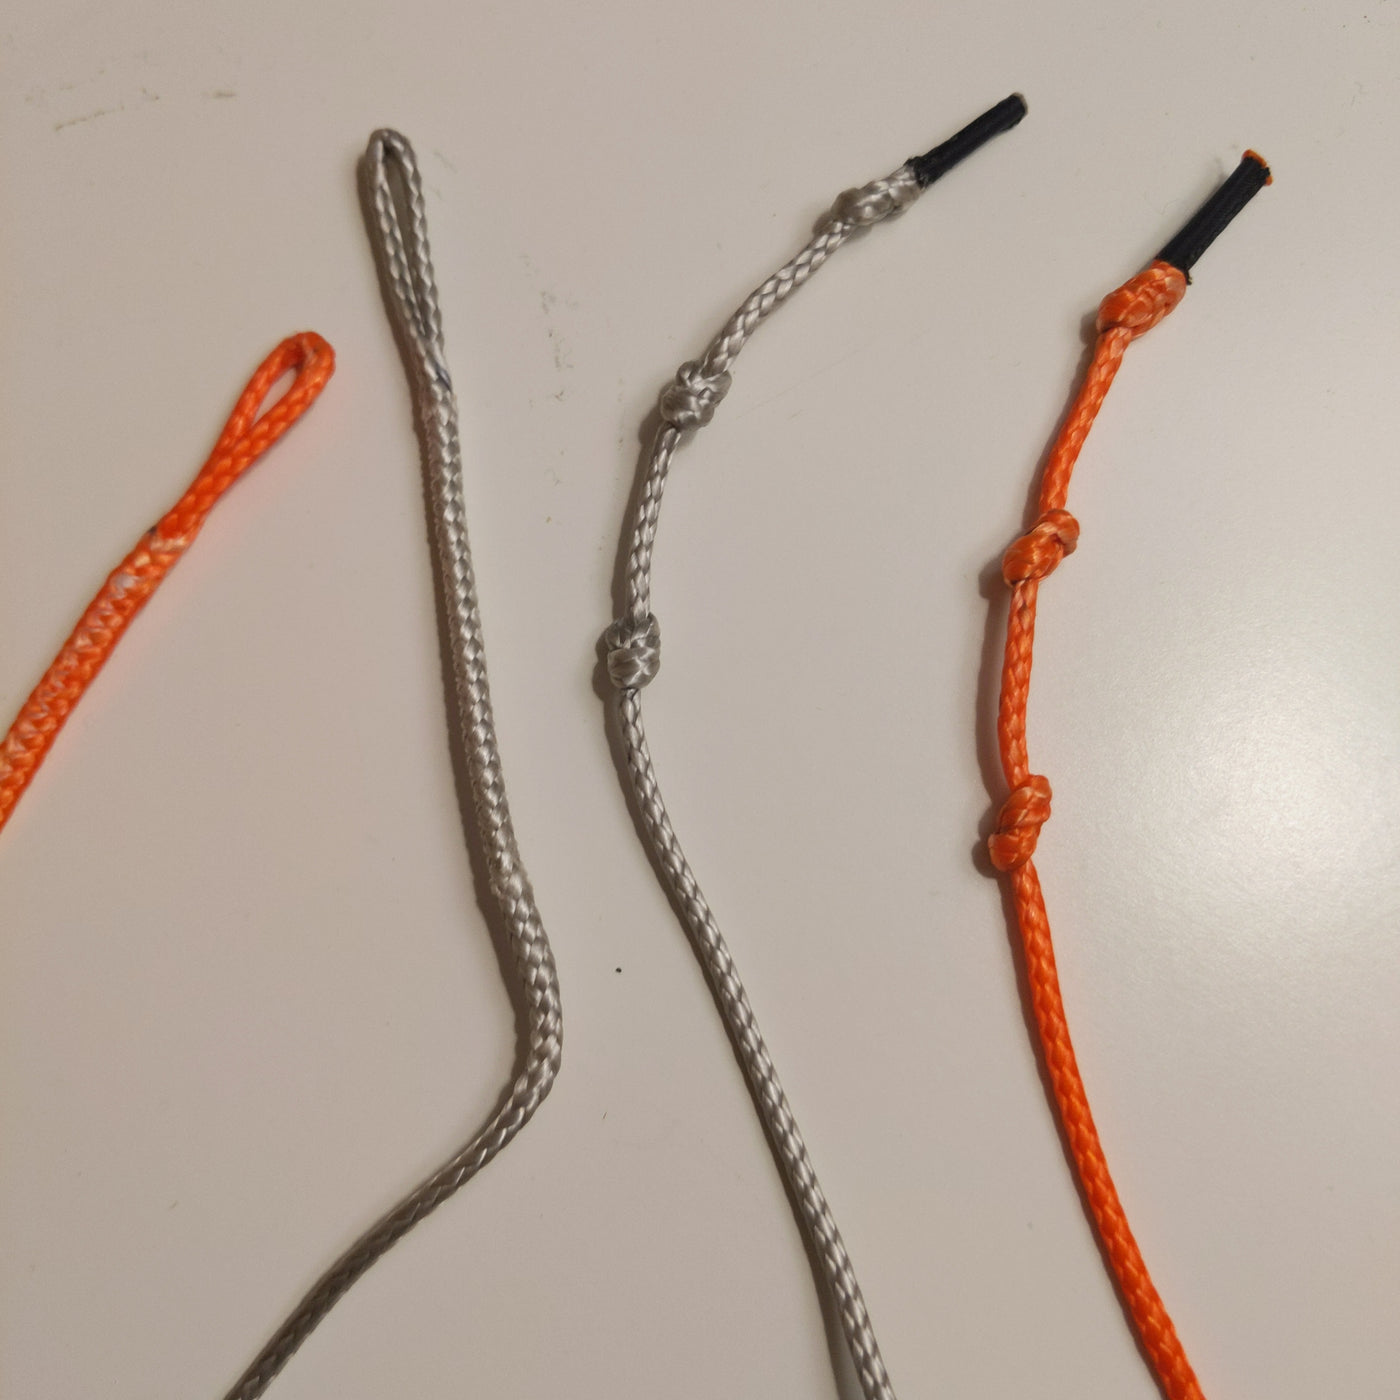 Leader lines used to connect rear steering lines to the bar under the bar floats with adjustment tuning knots.  Dyneema 60cm